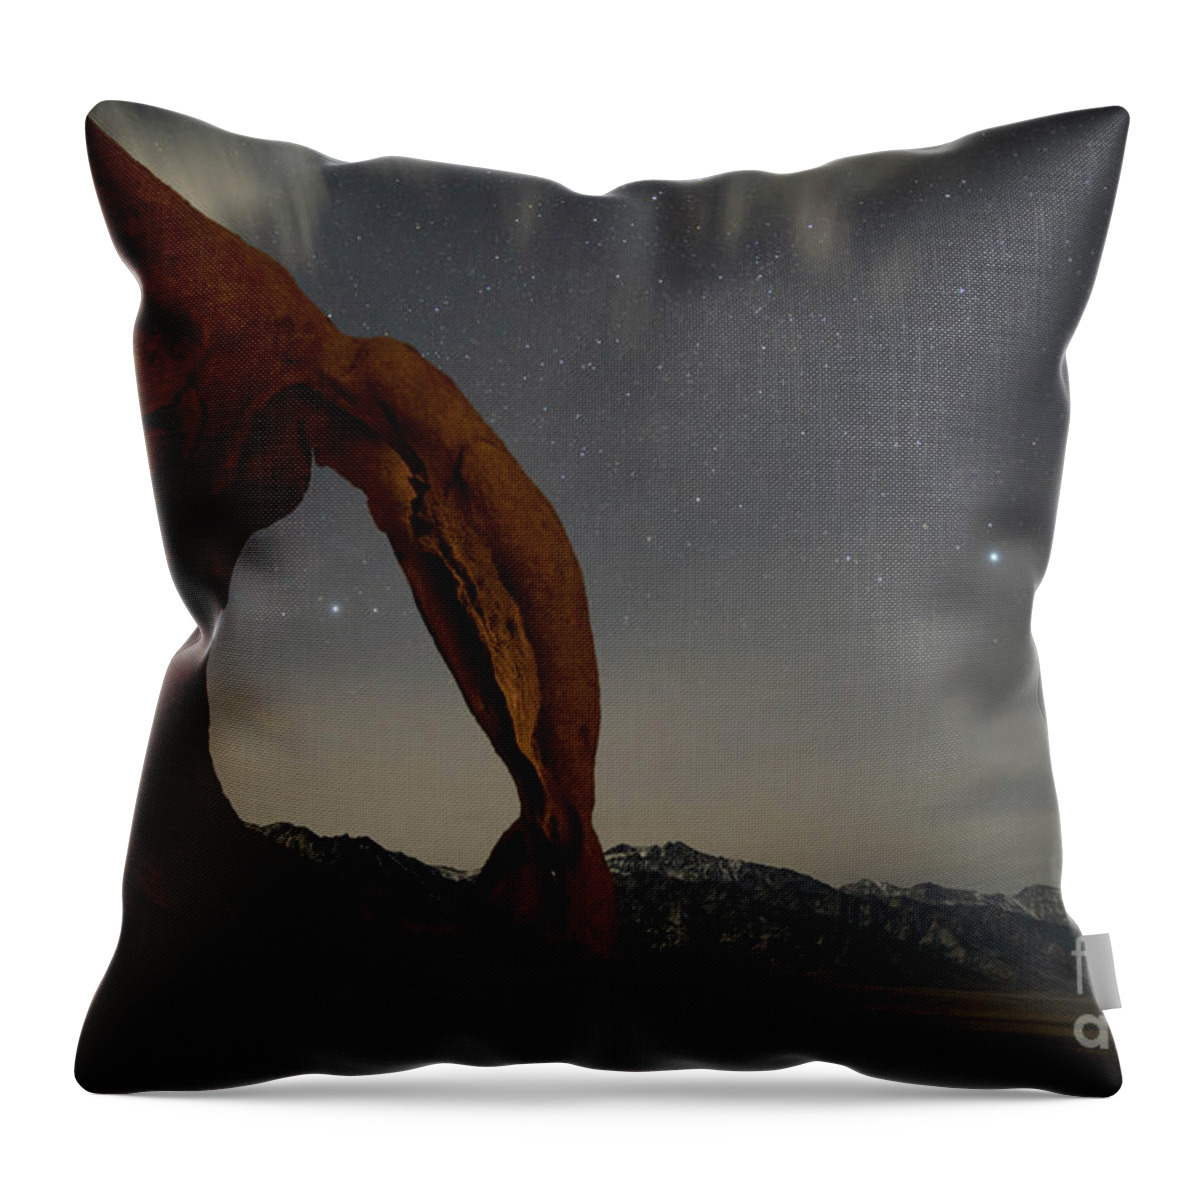 Cyclops Arch Throw Pillow featuring the photograph Night Sky At Cyclops Arch #1 by Keith Kapple